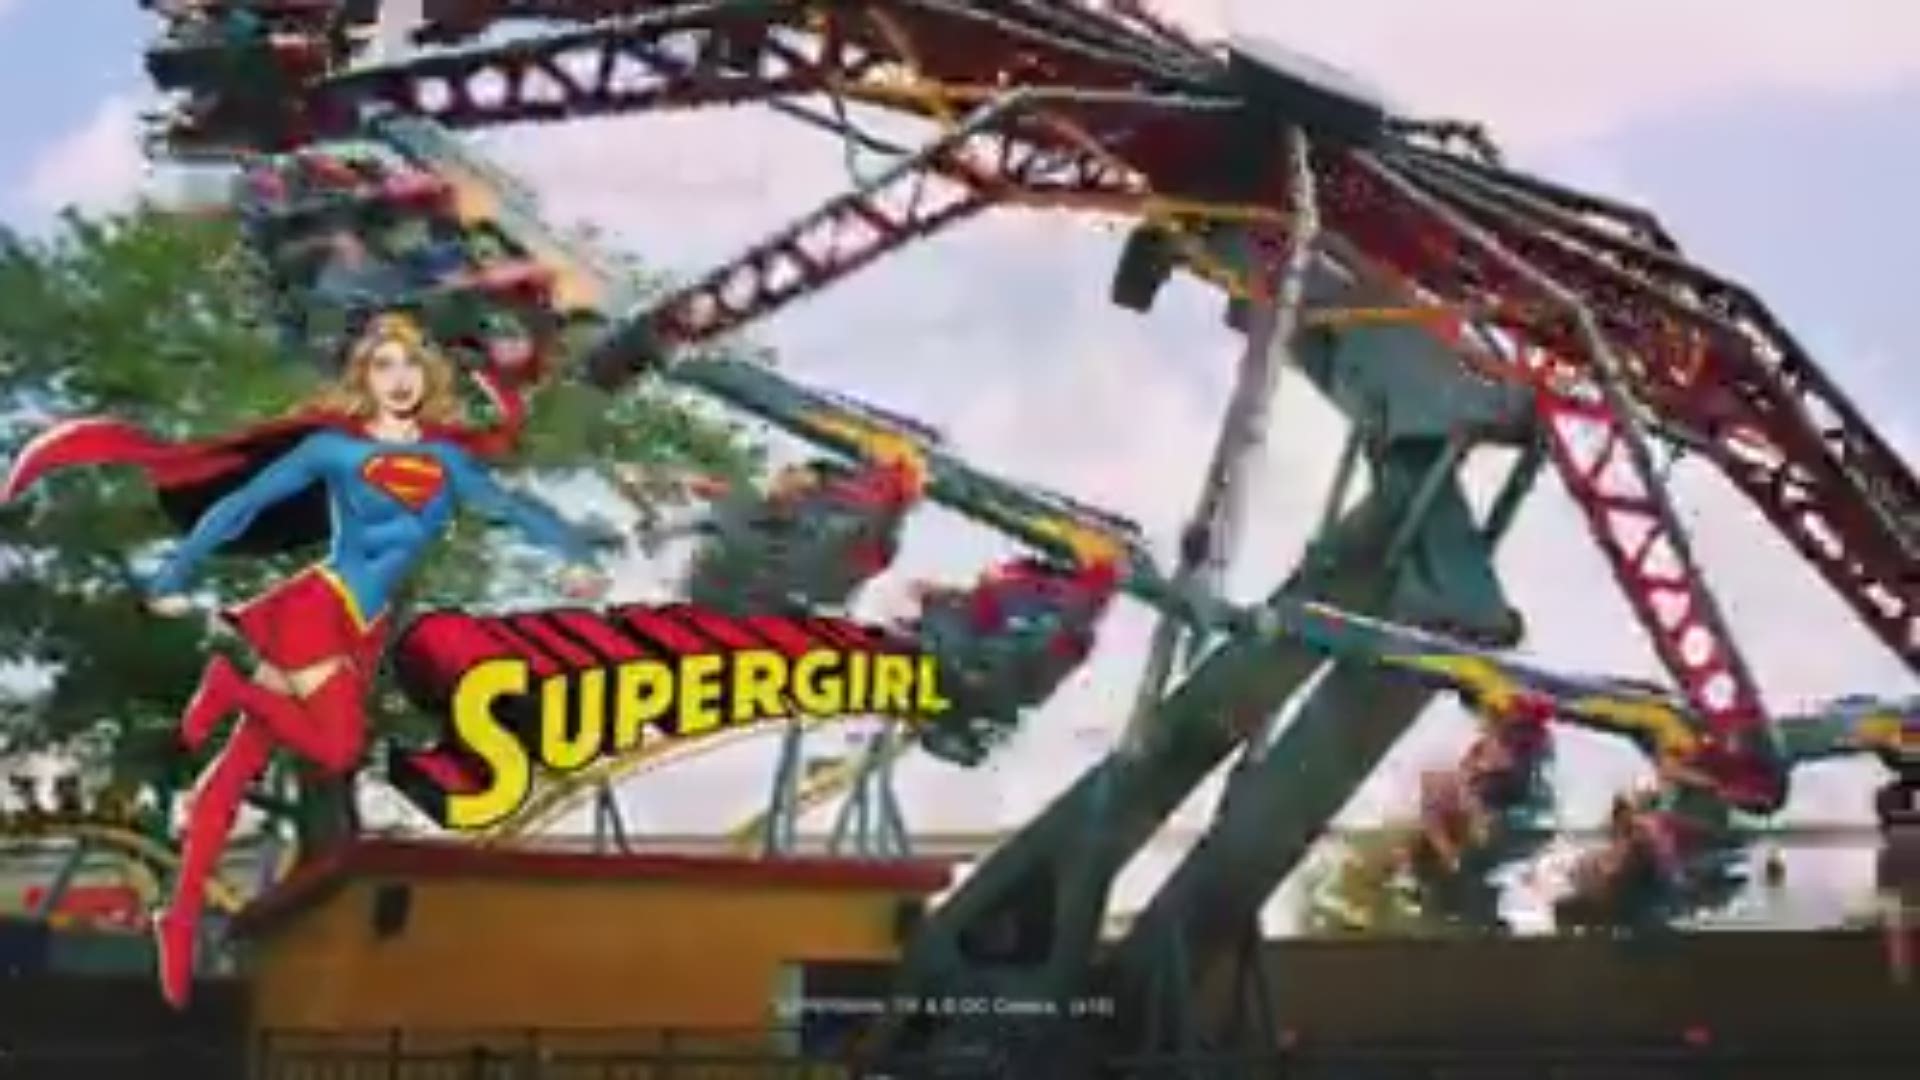 WATCH: Supergirl thrill ride at Six Flags St. Louis | 0